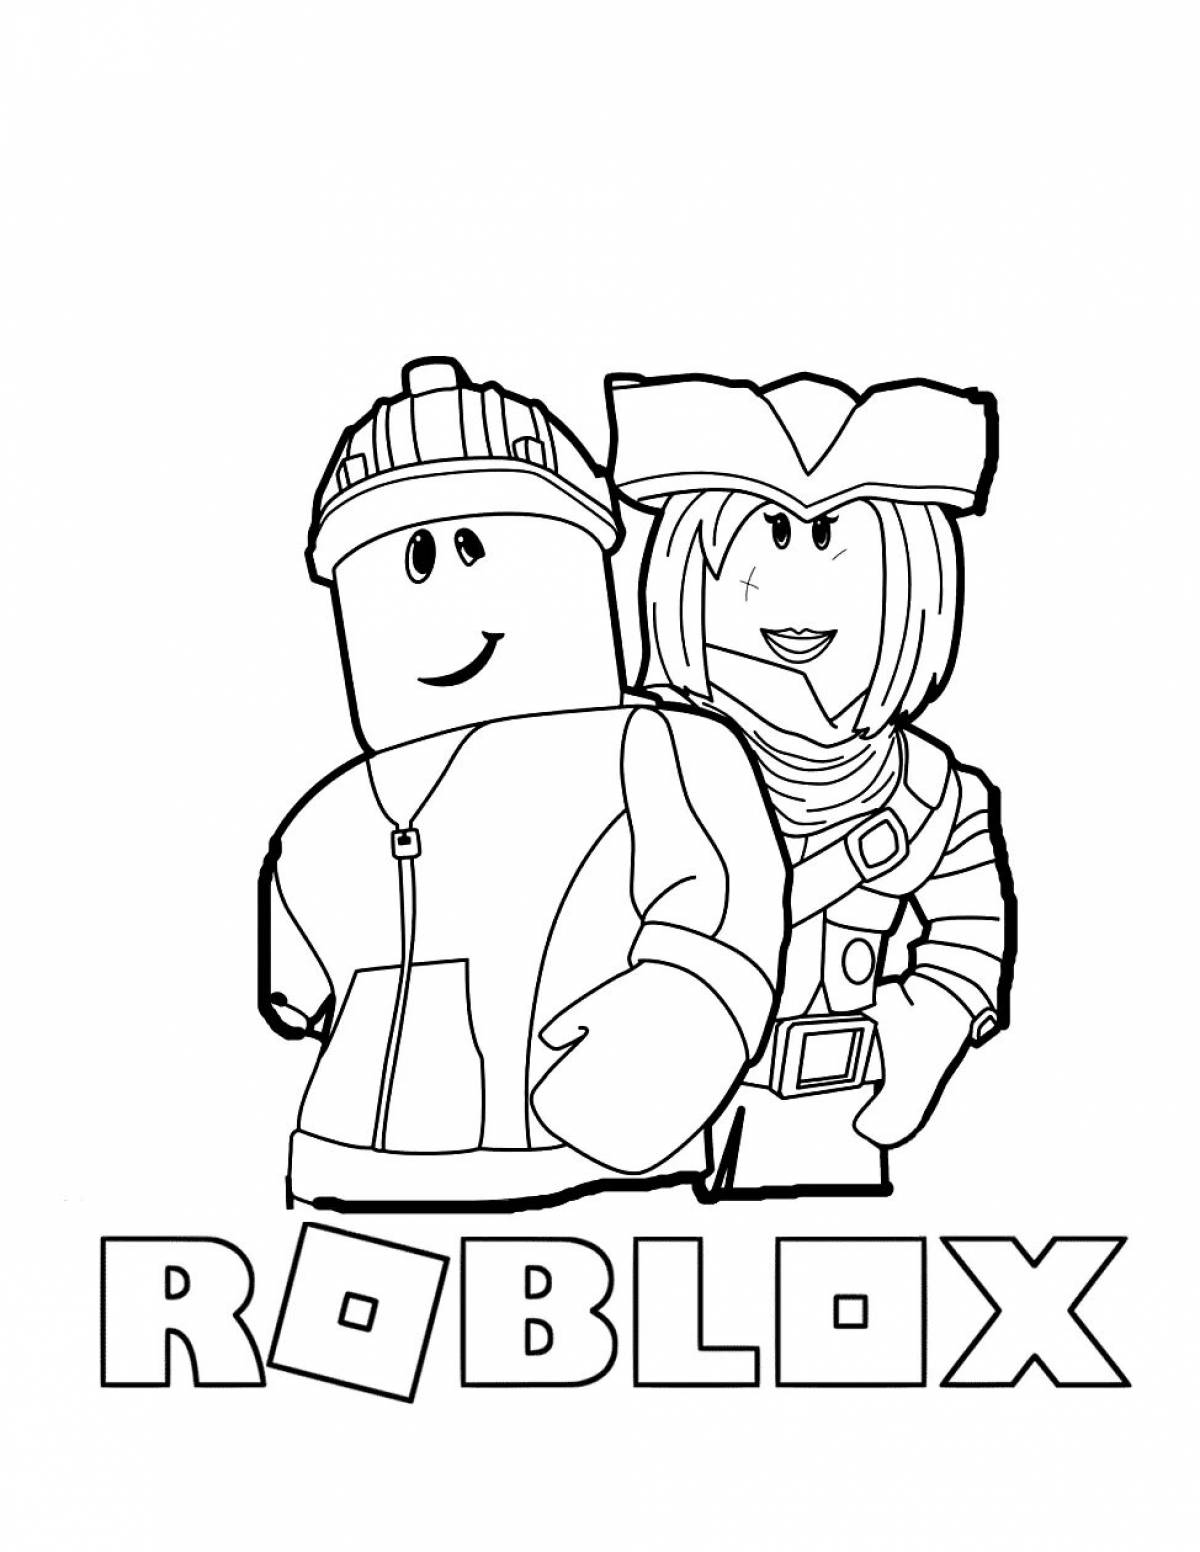 Roblox player coloring page